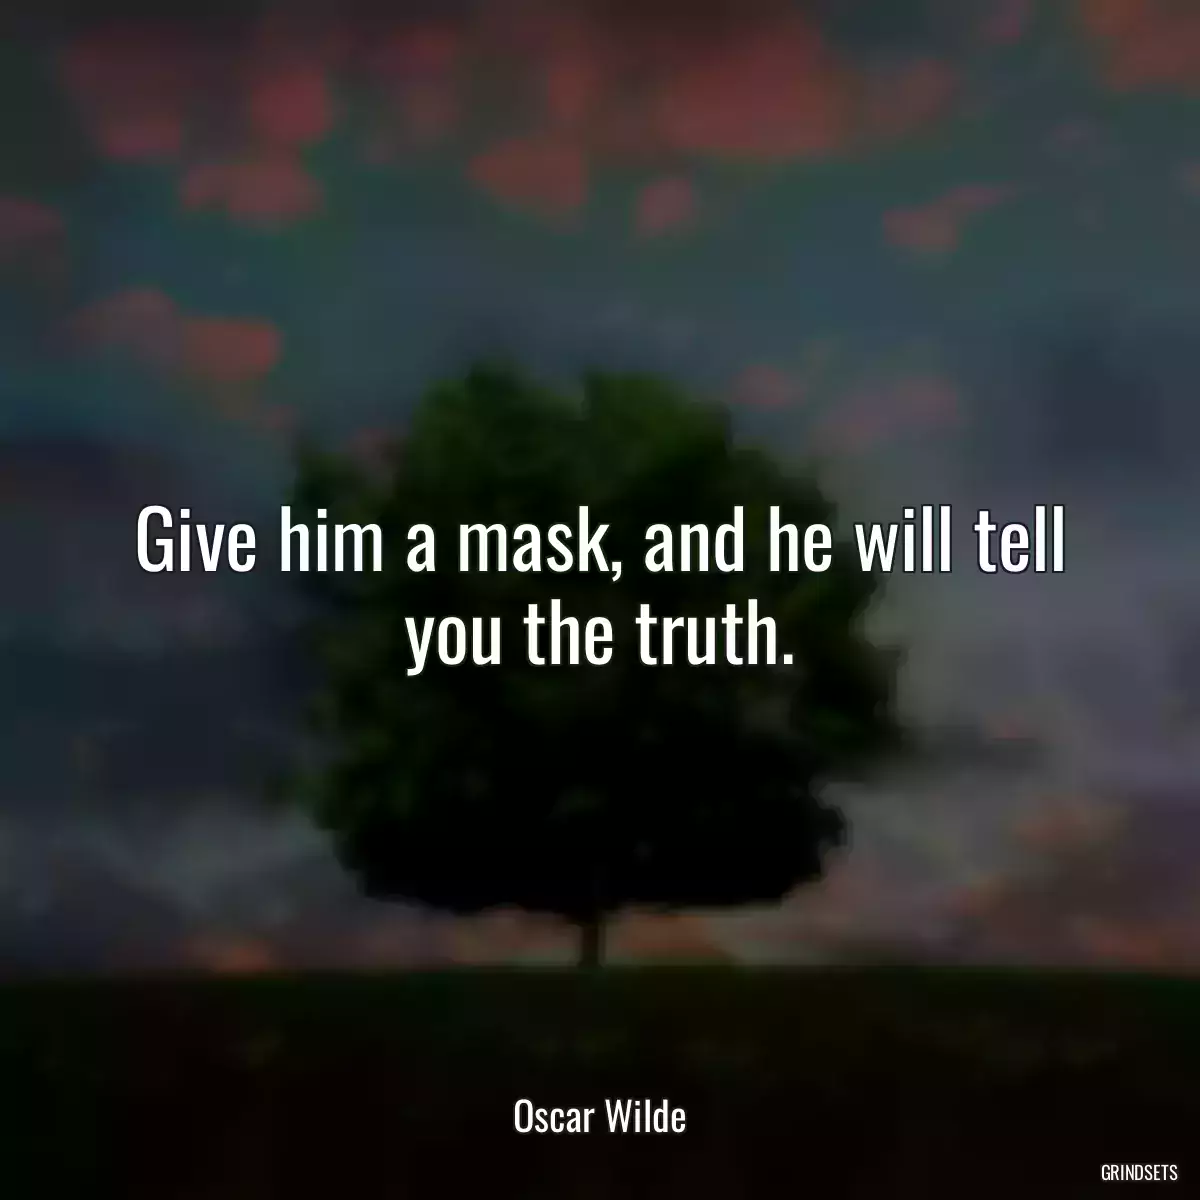 Give him a mask, and he will tell you the truth.